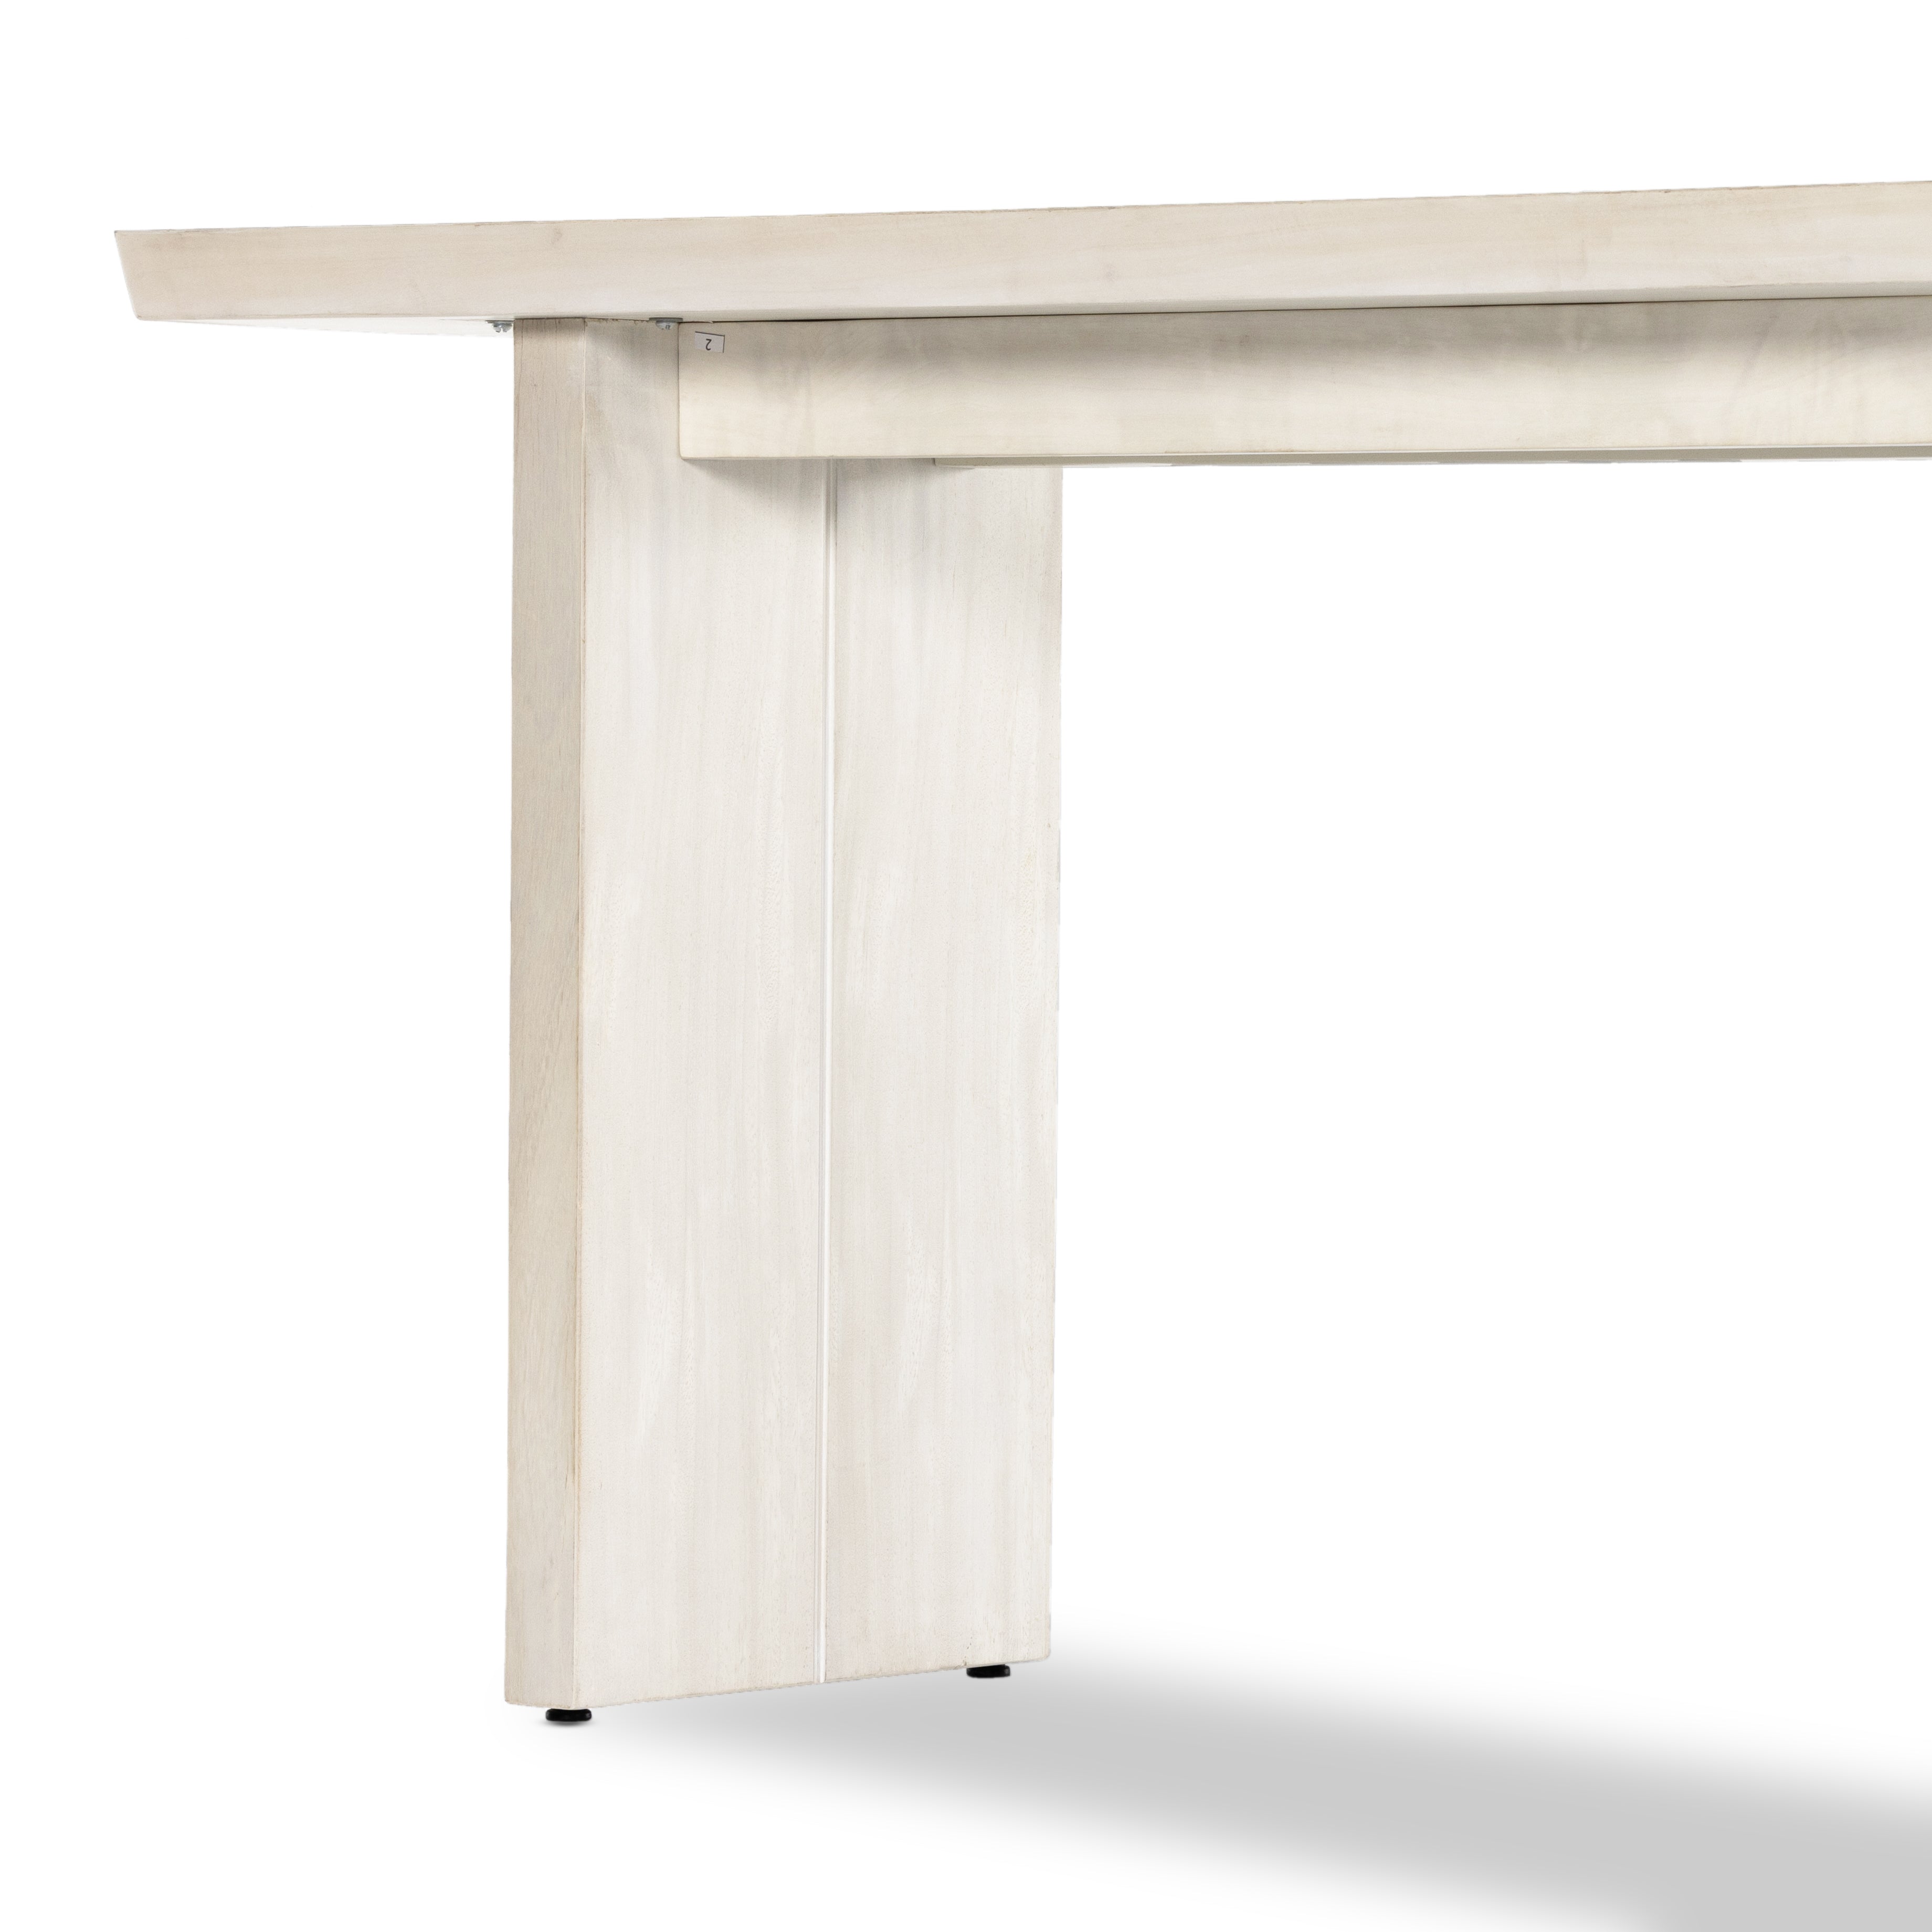 Made from bleached Guanacaste, a minimalist console table features live edging and split slab detailing. Light in look and finish, for versatility in any space or style. Amethyst Home provides interior design, new construction, custom furniture and area rugs in the Alpharetta metro area